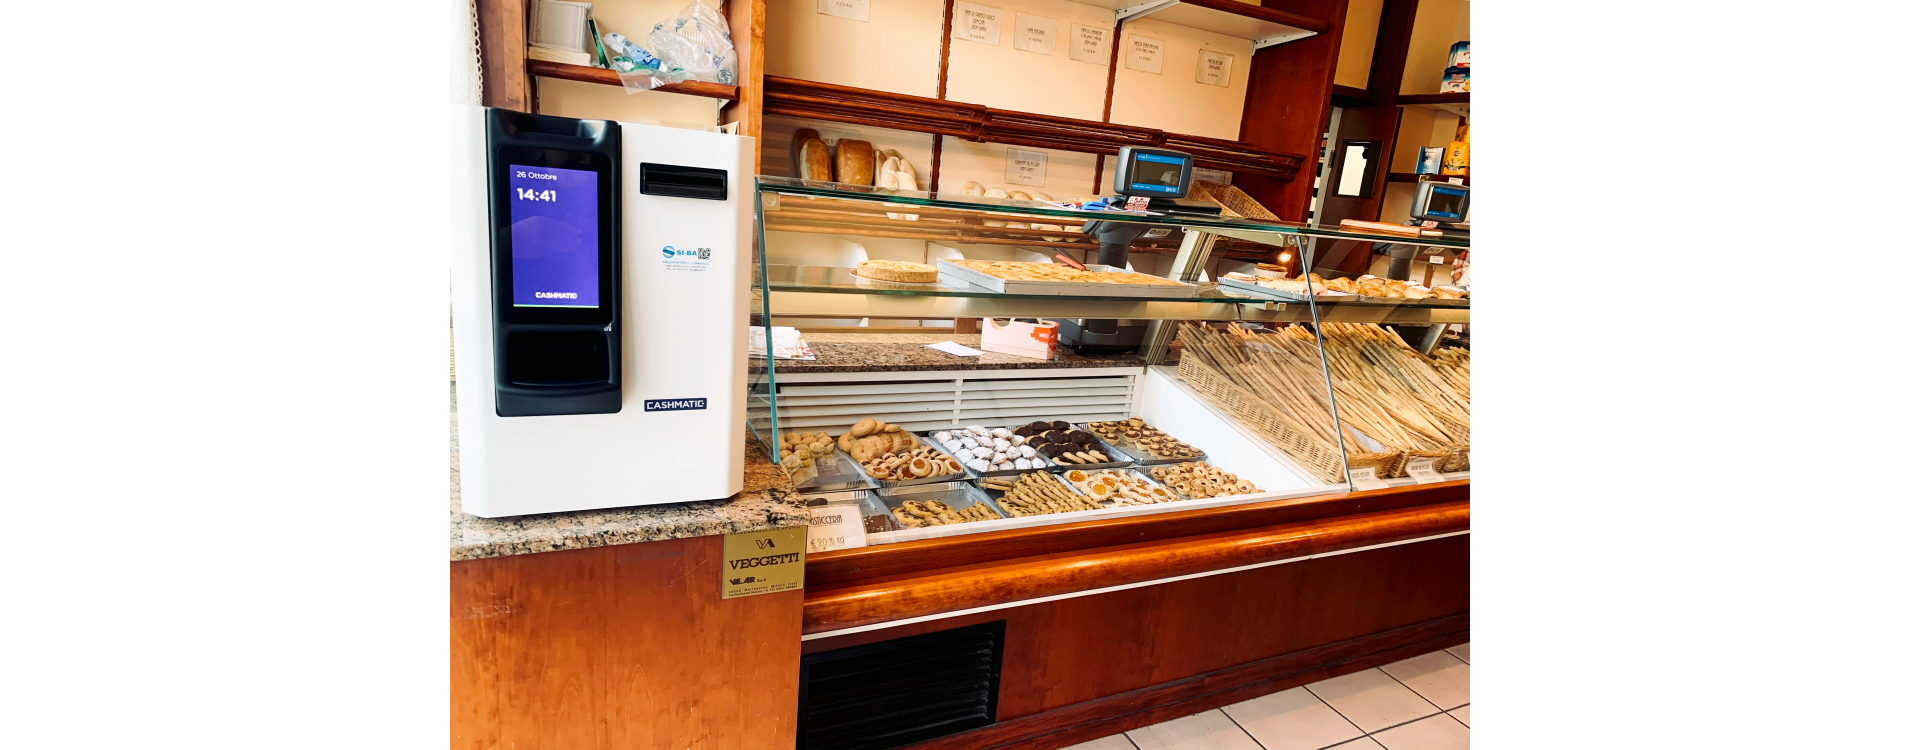 CASHMATIC SELFPAY - Ideal for any type of retail business